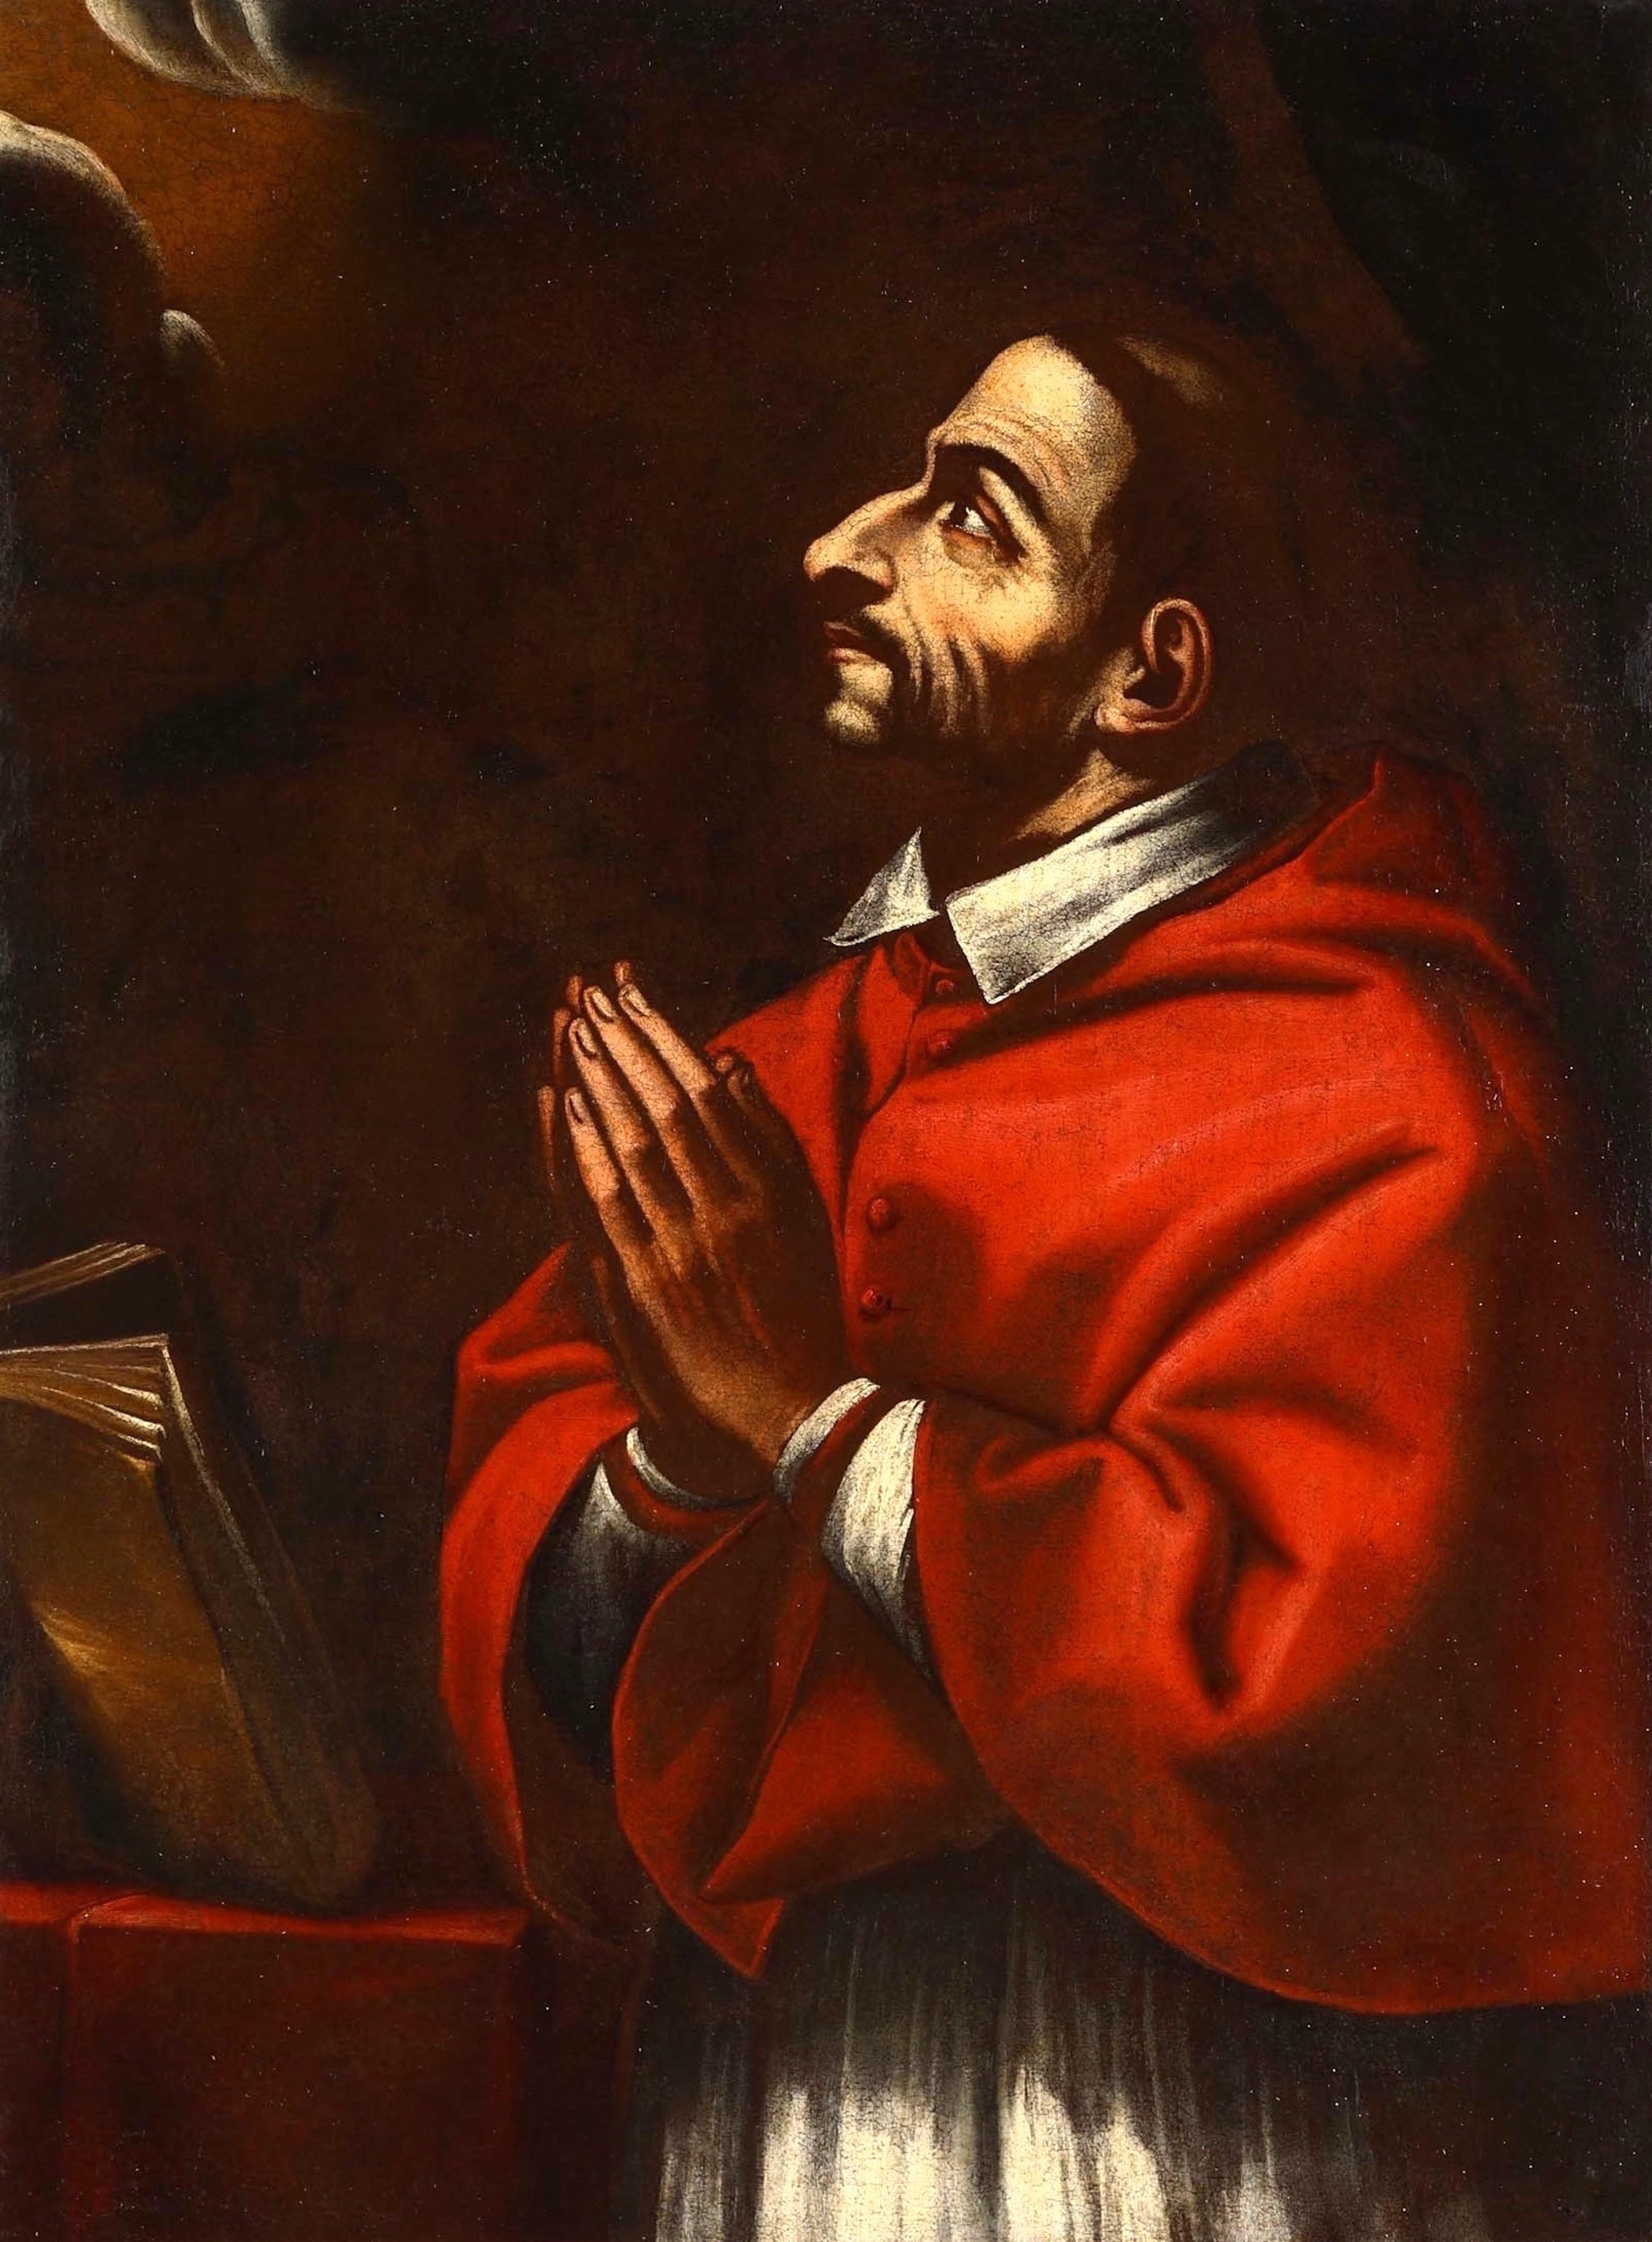 Saint Charles Borromeo
Lombardy School from the early 17th century

oil on canvas
97 x 72 cm
with frame 109 x 84

The painting represents an intense portrait of San Carlo Borromeo in prayer, represented in half-length with the dress of the